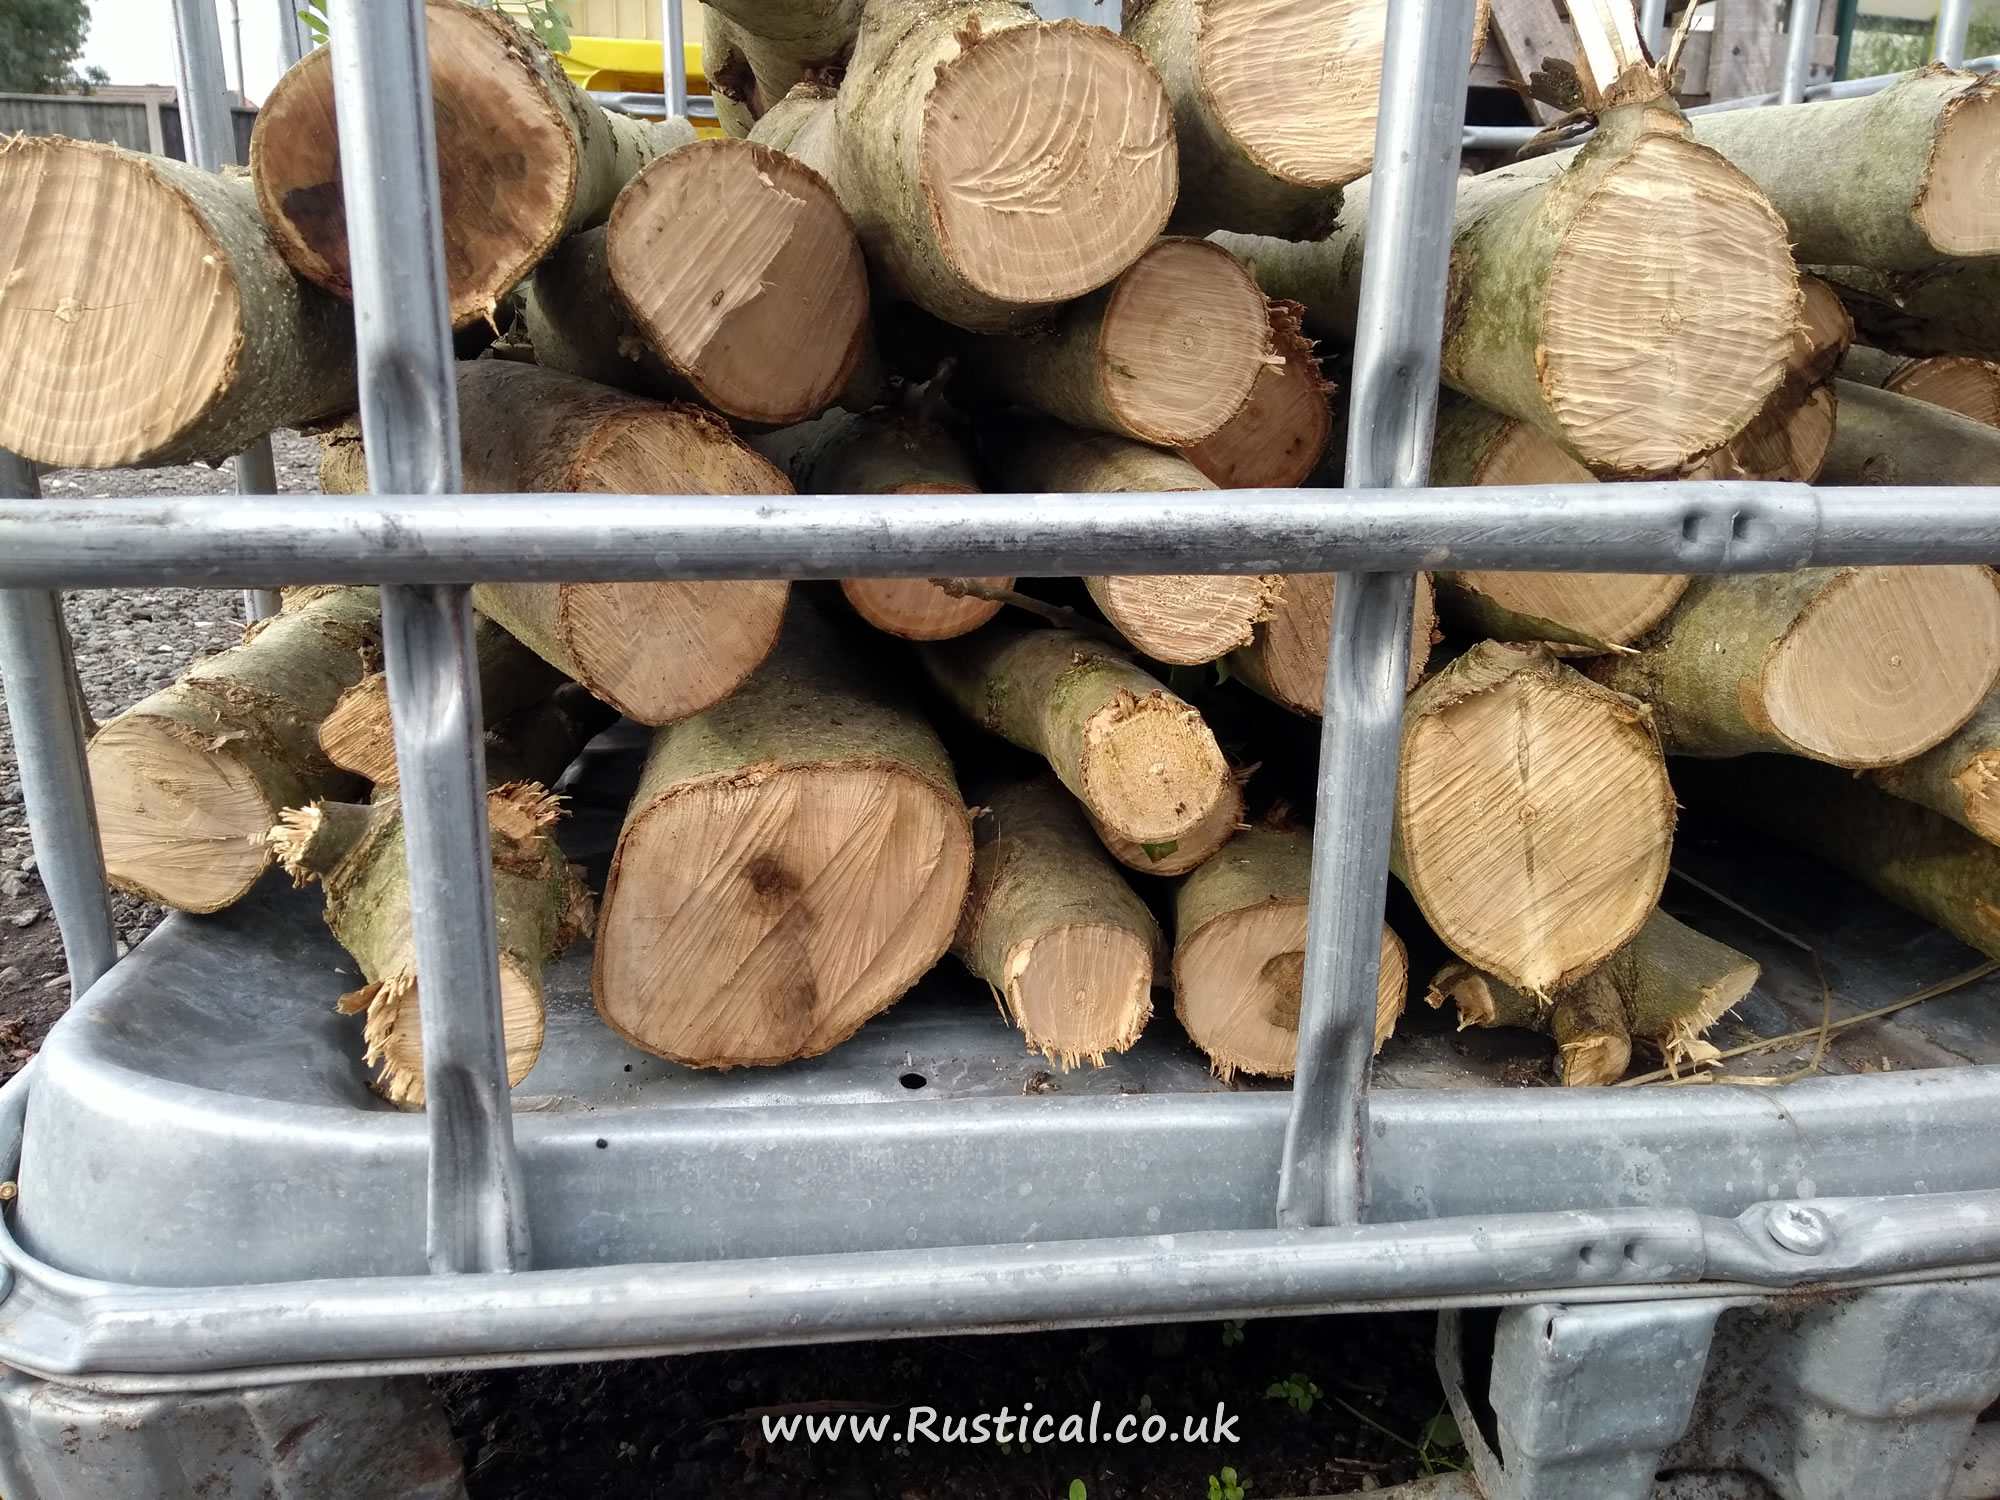 Coppiced Ash stacked in an IBC crate to season